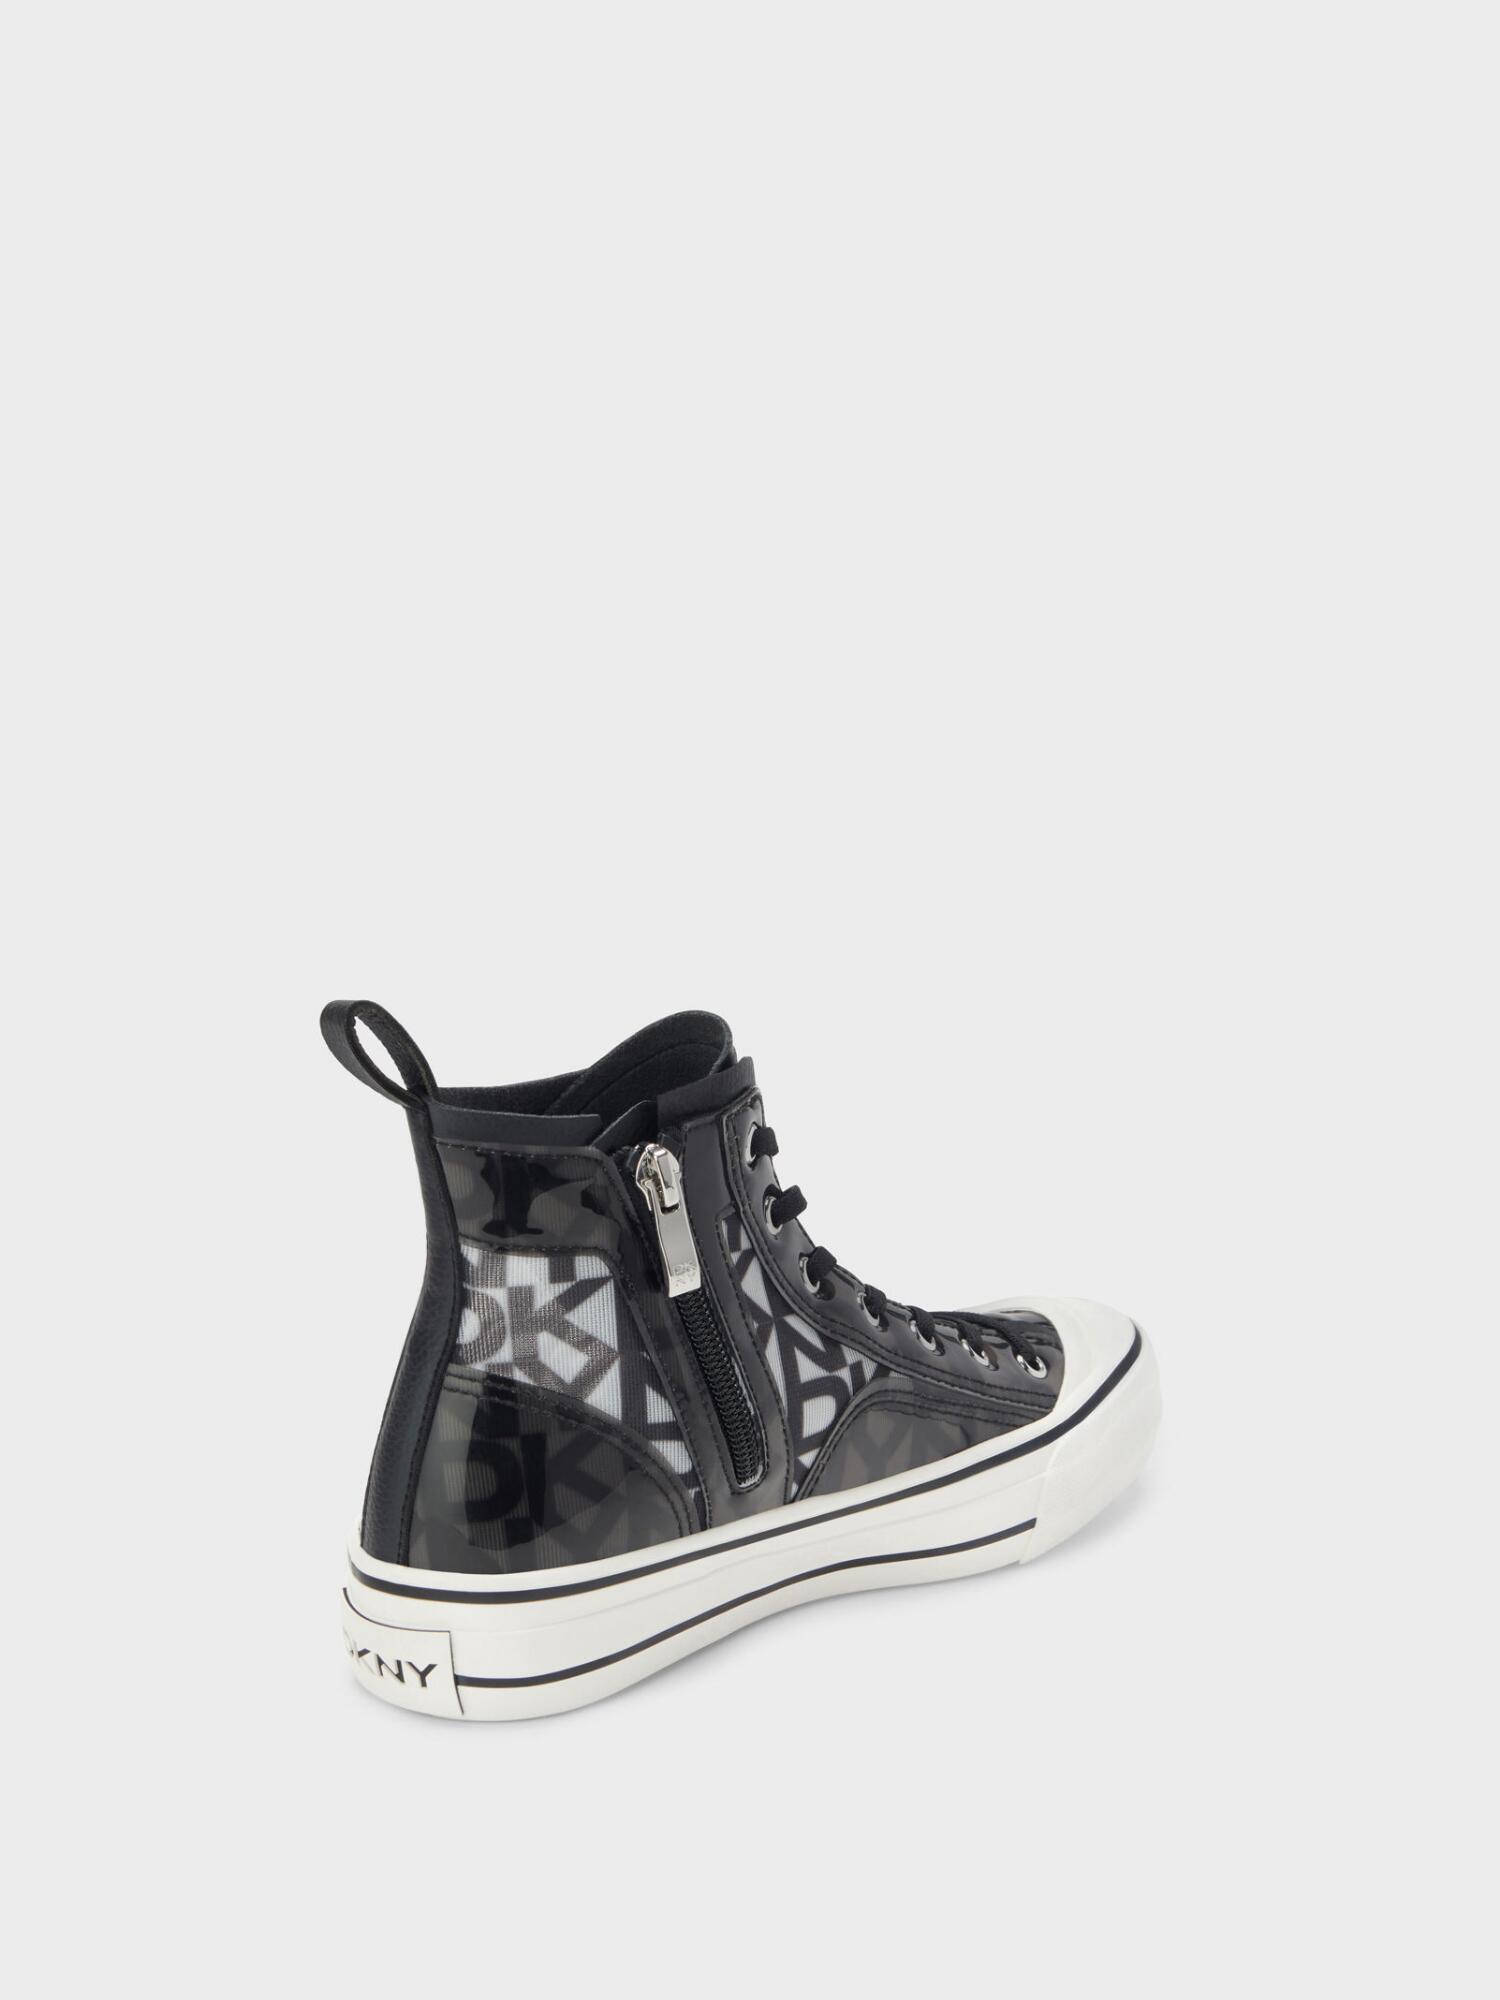 DKNY Unisex Sid Lace Up High-top Sneaker in White/Black (Black) - Lyst